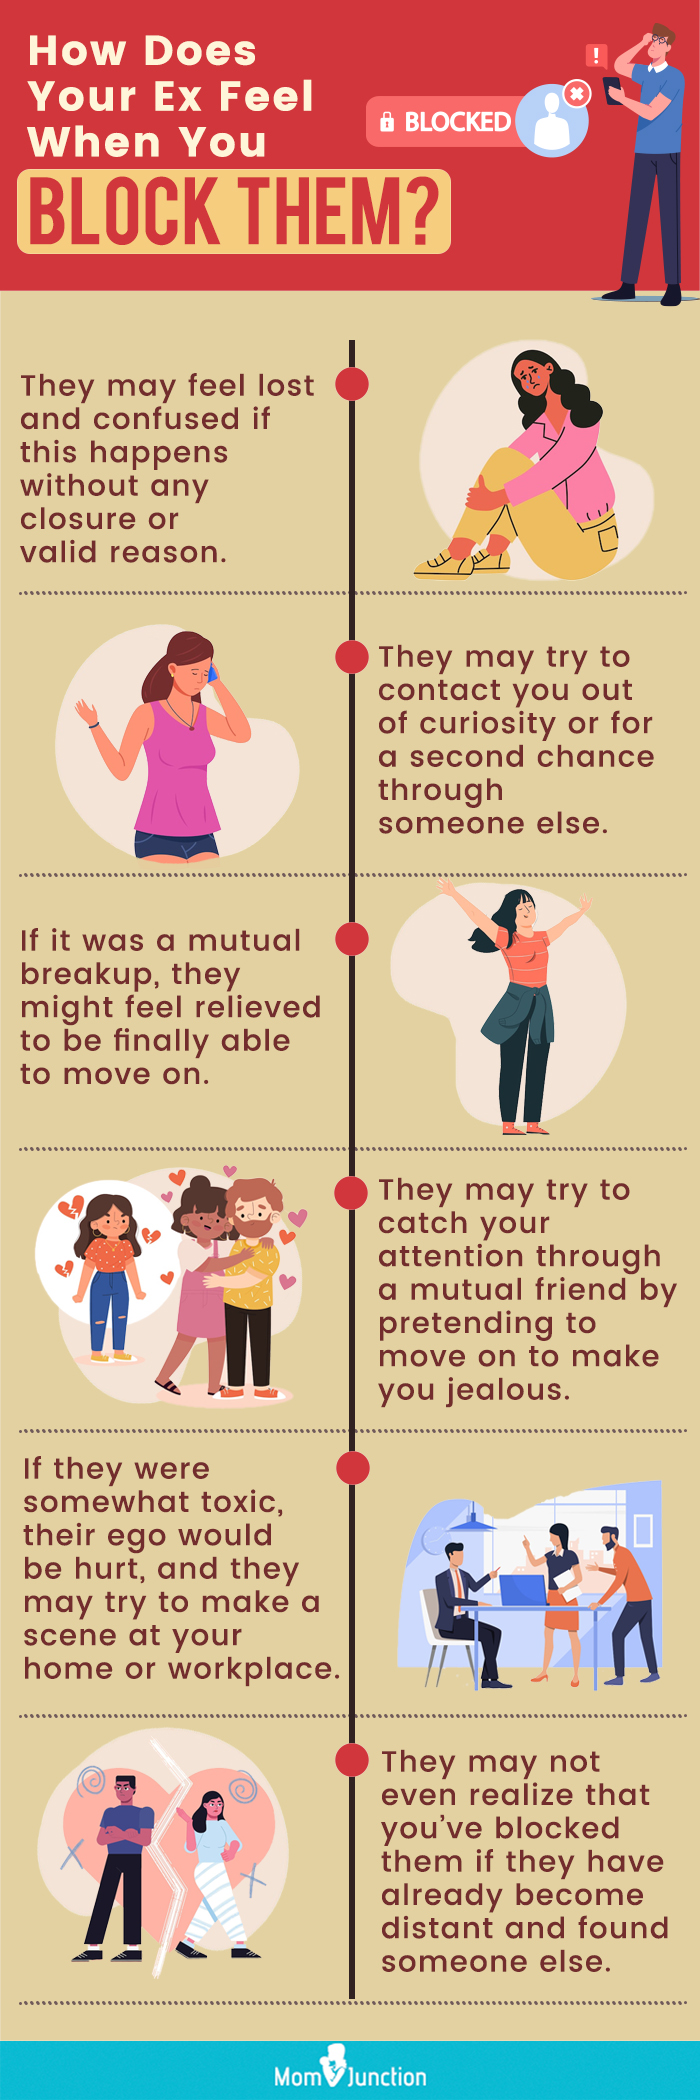 how does your ex feel when you block them (infographic)